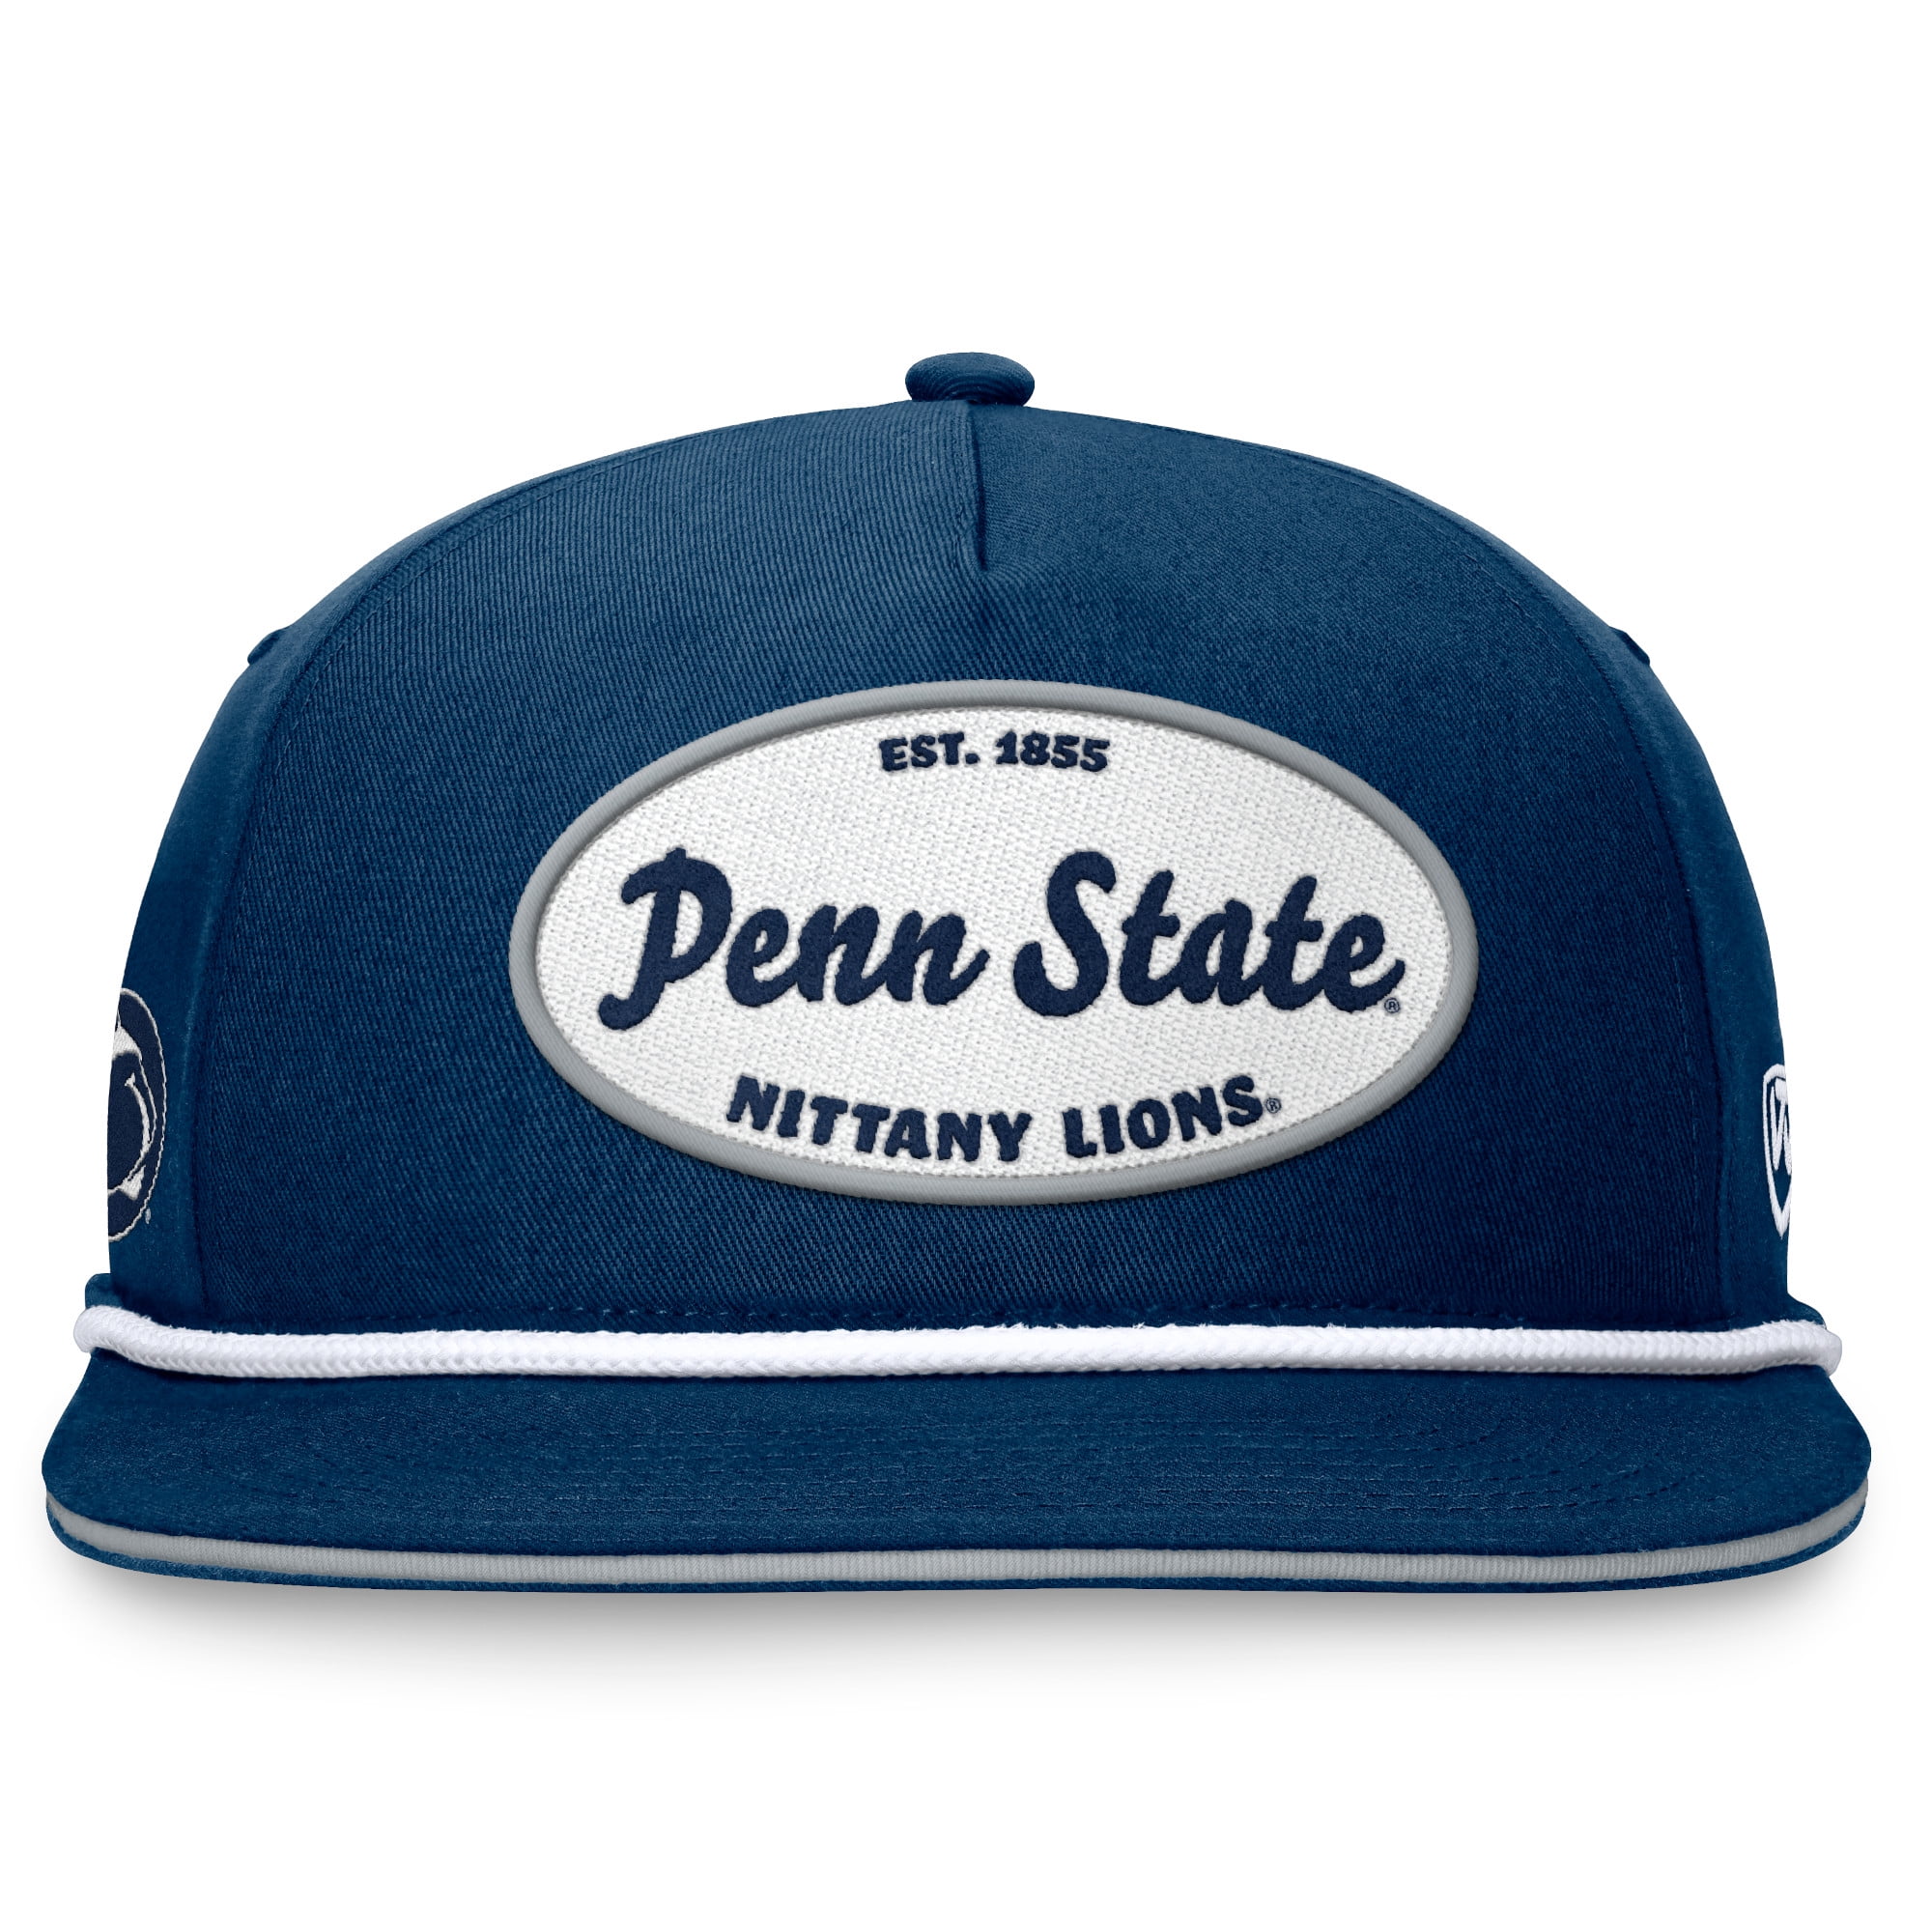 Men's Top of the World Navy Penn State Nittany Lions Iron Golfer Adjustable  Hat 